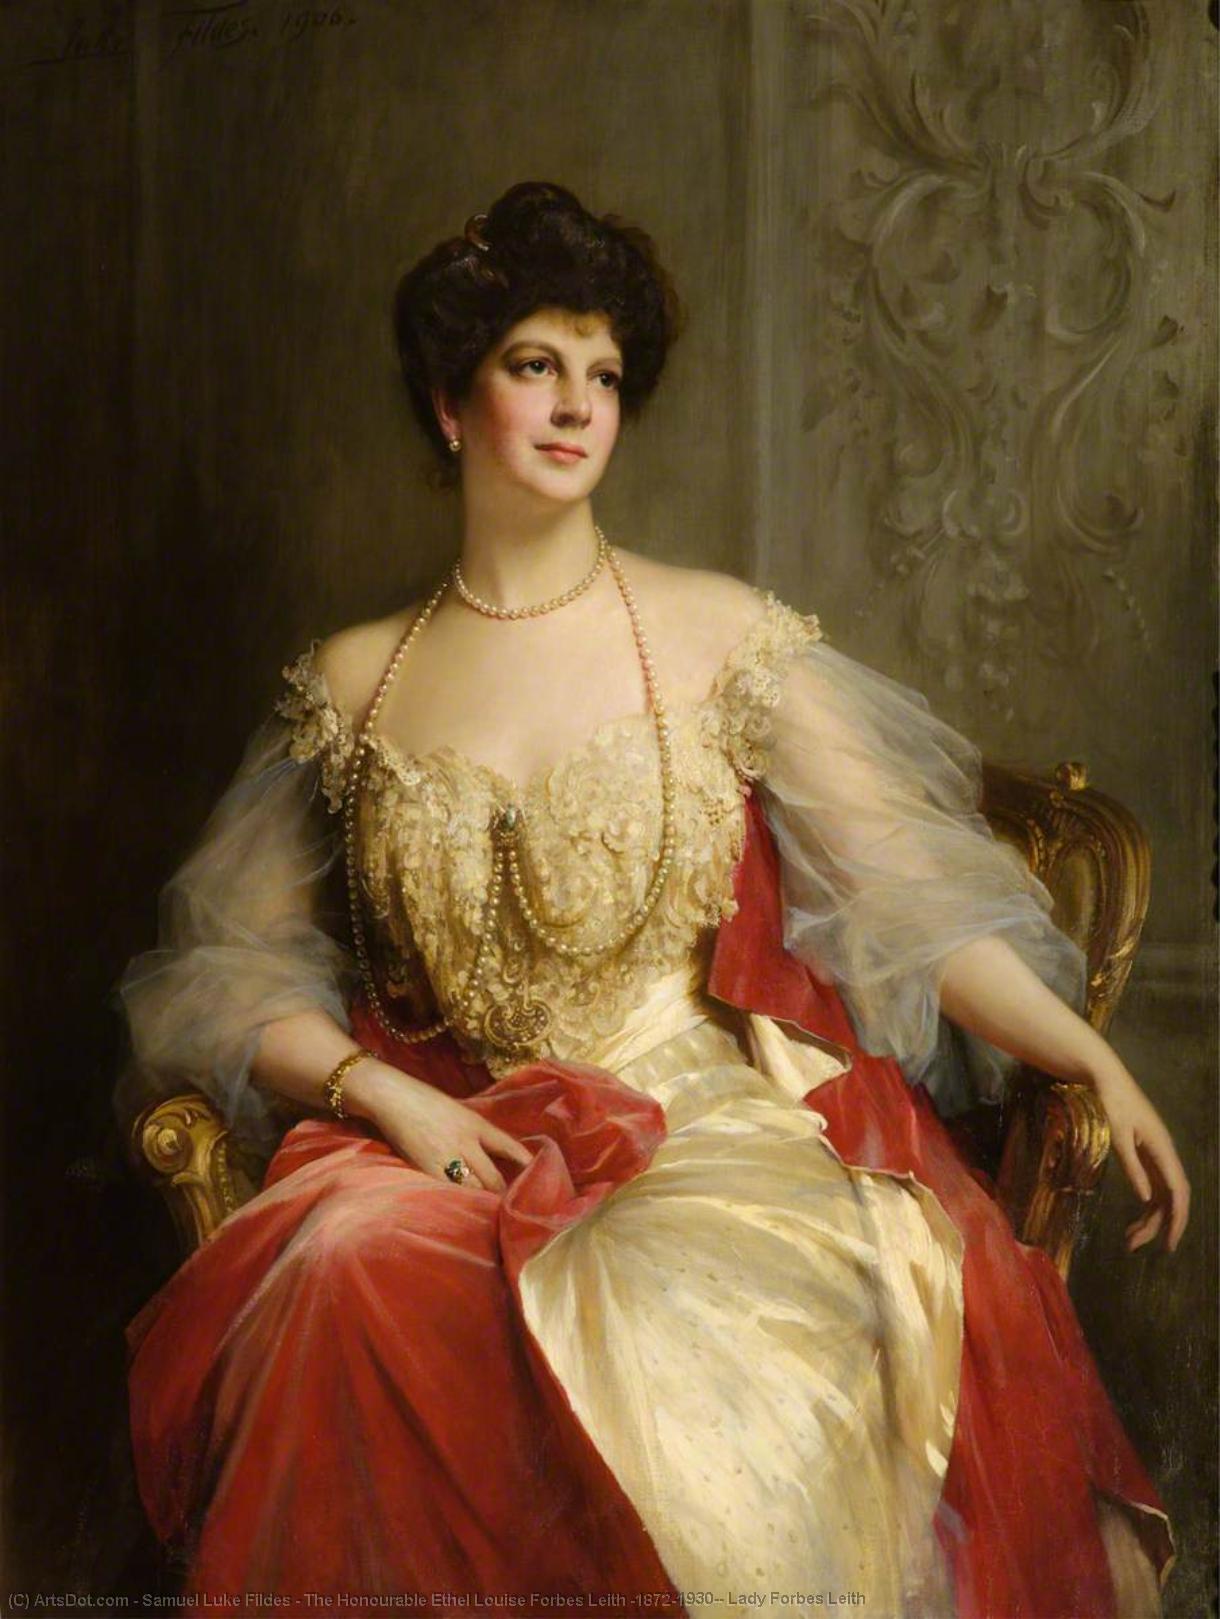 WikiOO.org - 백과 사전 - 회화, 삽화 Samuel Luke Fildes - The Honourable Ethel Louise Forbes Leith (1872–1930), Lady Forbes Leith